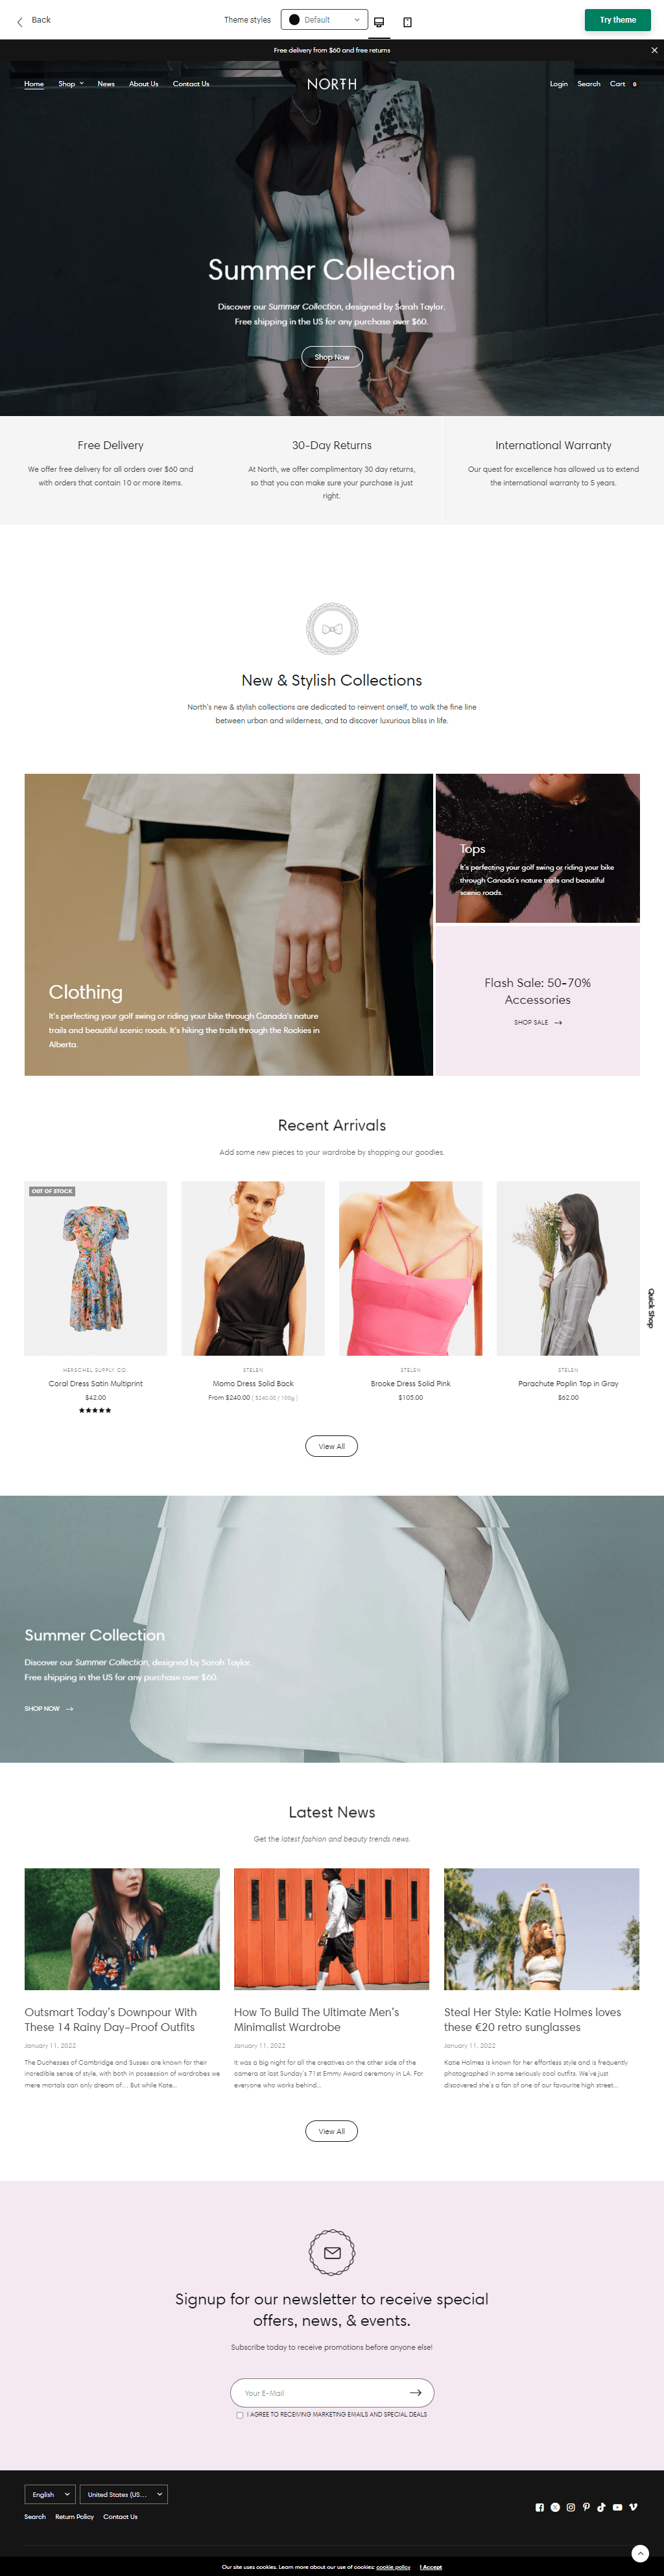 Shopify shopify store Shopify website shopify store design Shopify dropshipping ecommerce website Woocommerce Ecommerce Website Design Webdesign